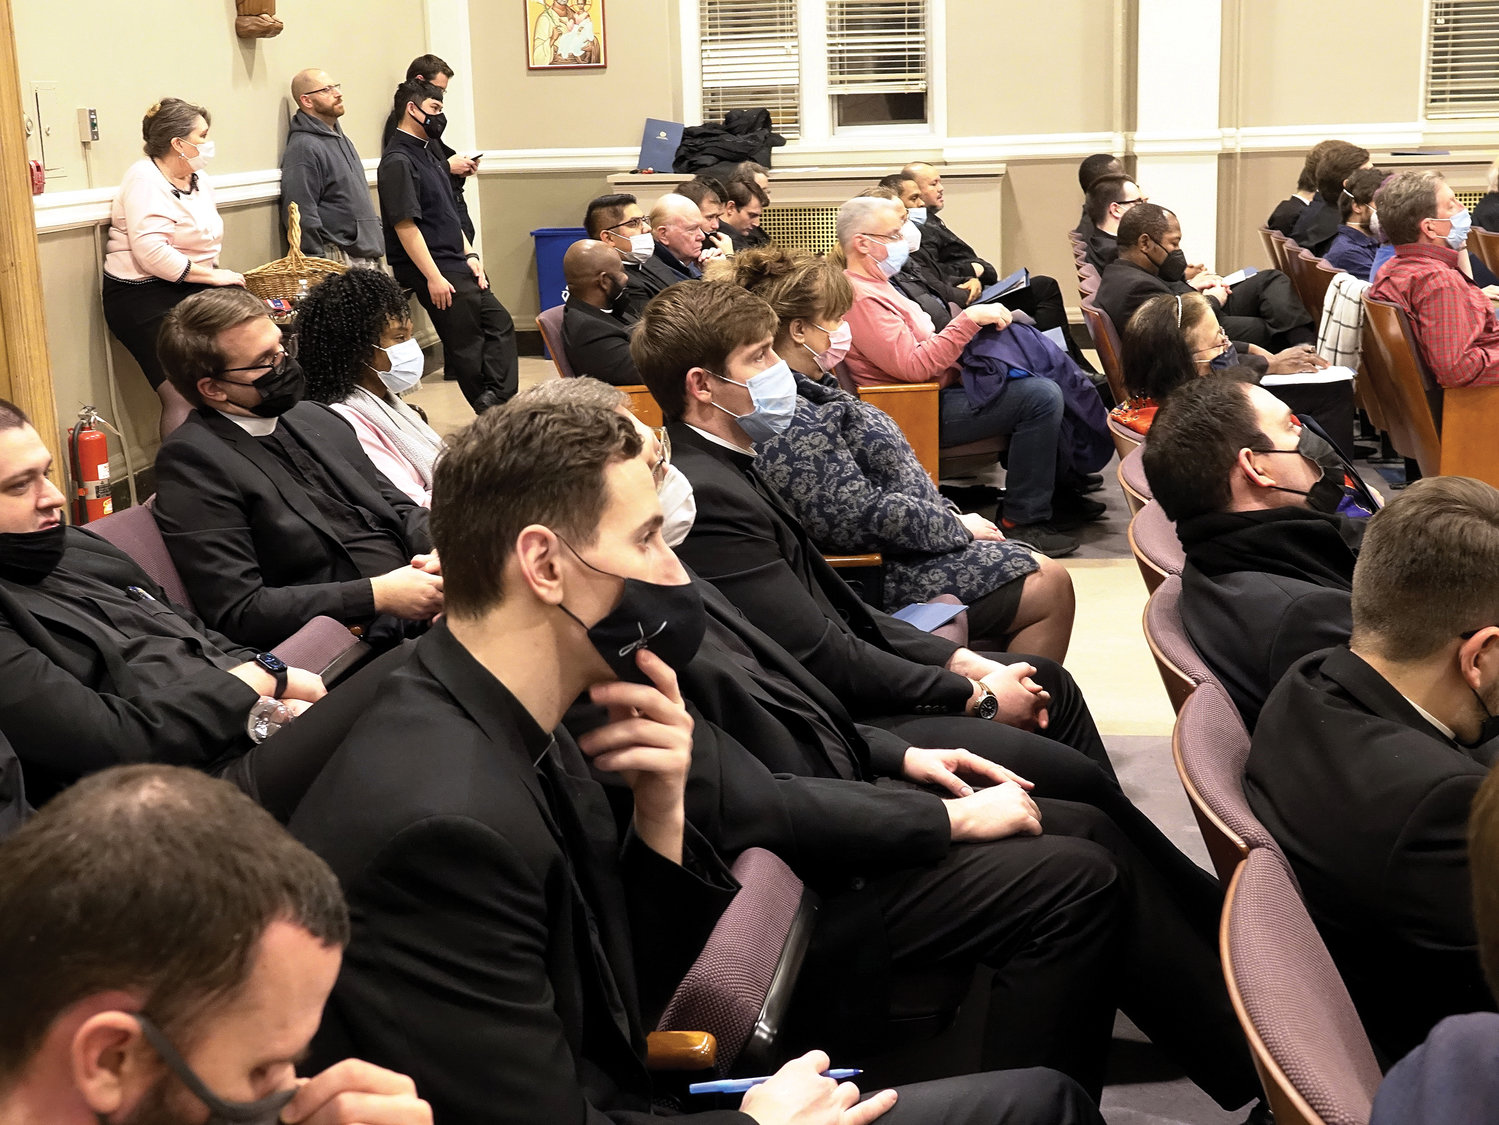 The large crowd, including many seminarians, listens closely to the talk.